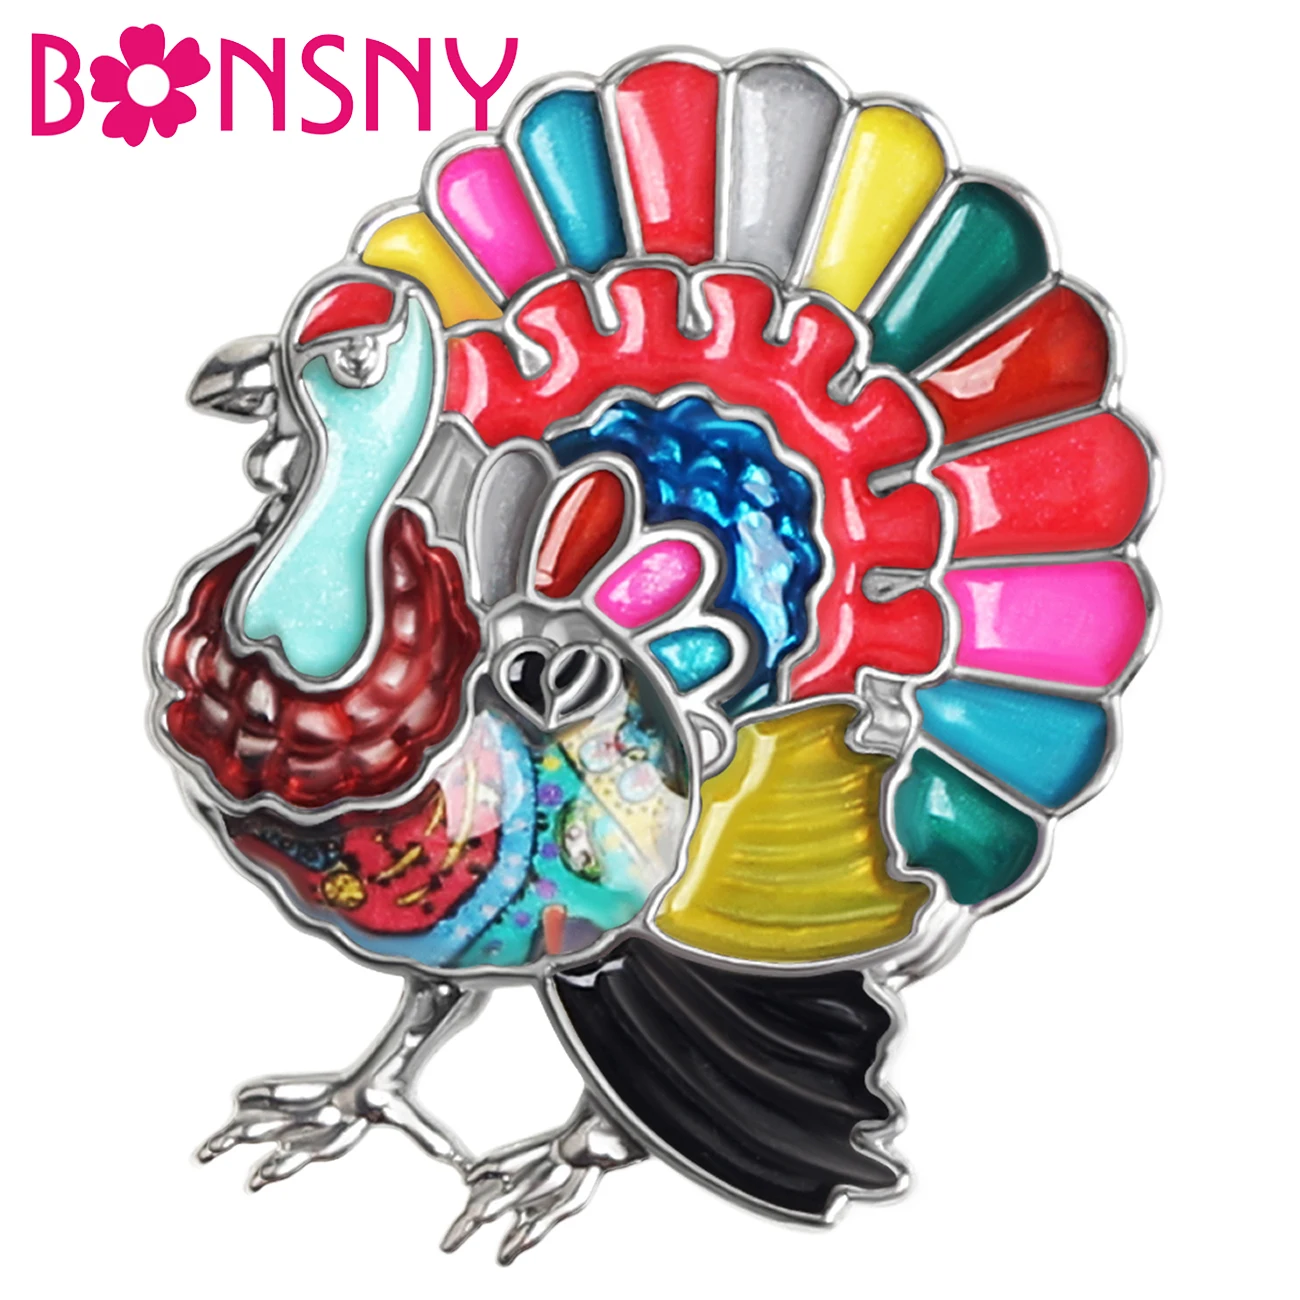 

Bonsny Enamel Alloy Mental Floral Thanksgiving Sweet Turkey Chicken Brooches Pin Scarf Charm Jewelry For Women Teens Girls Party